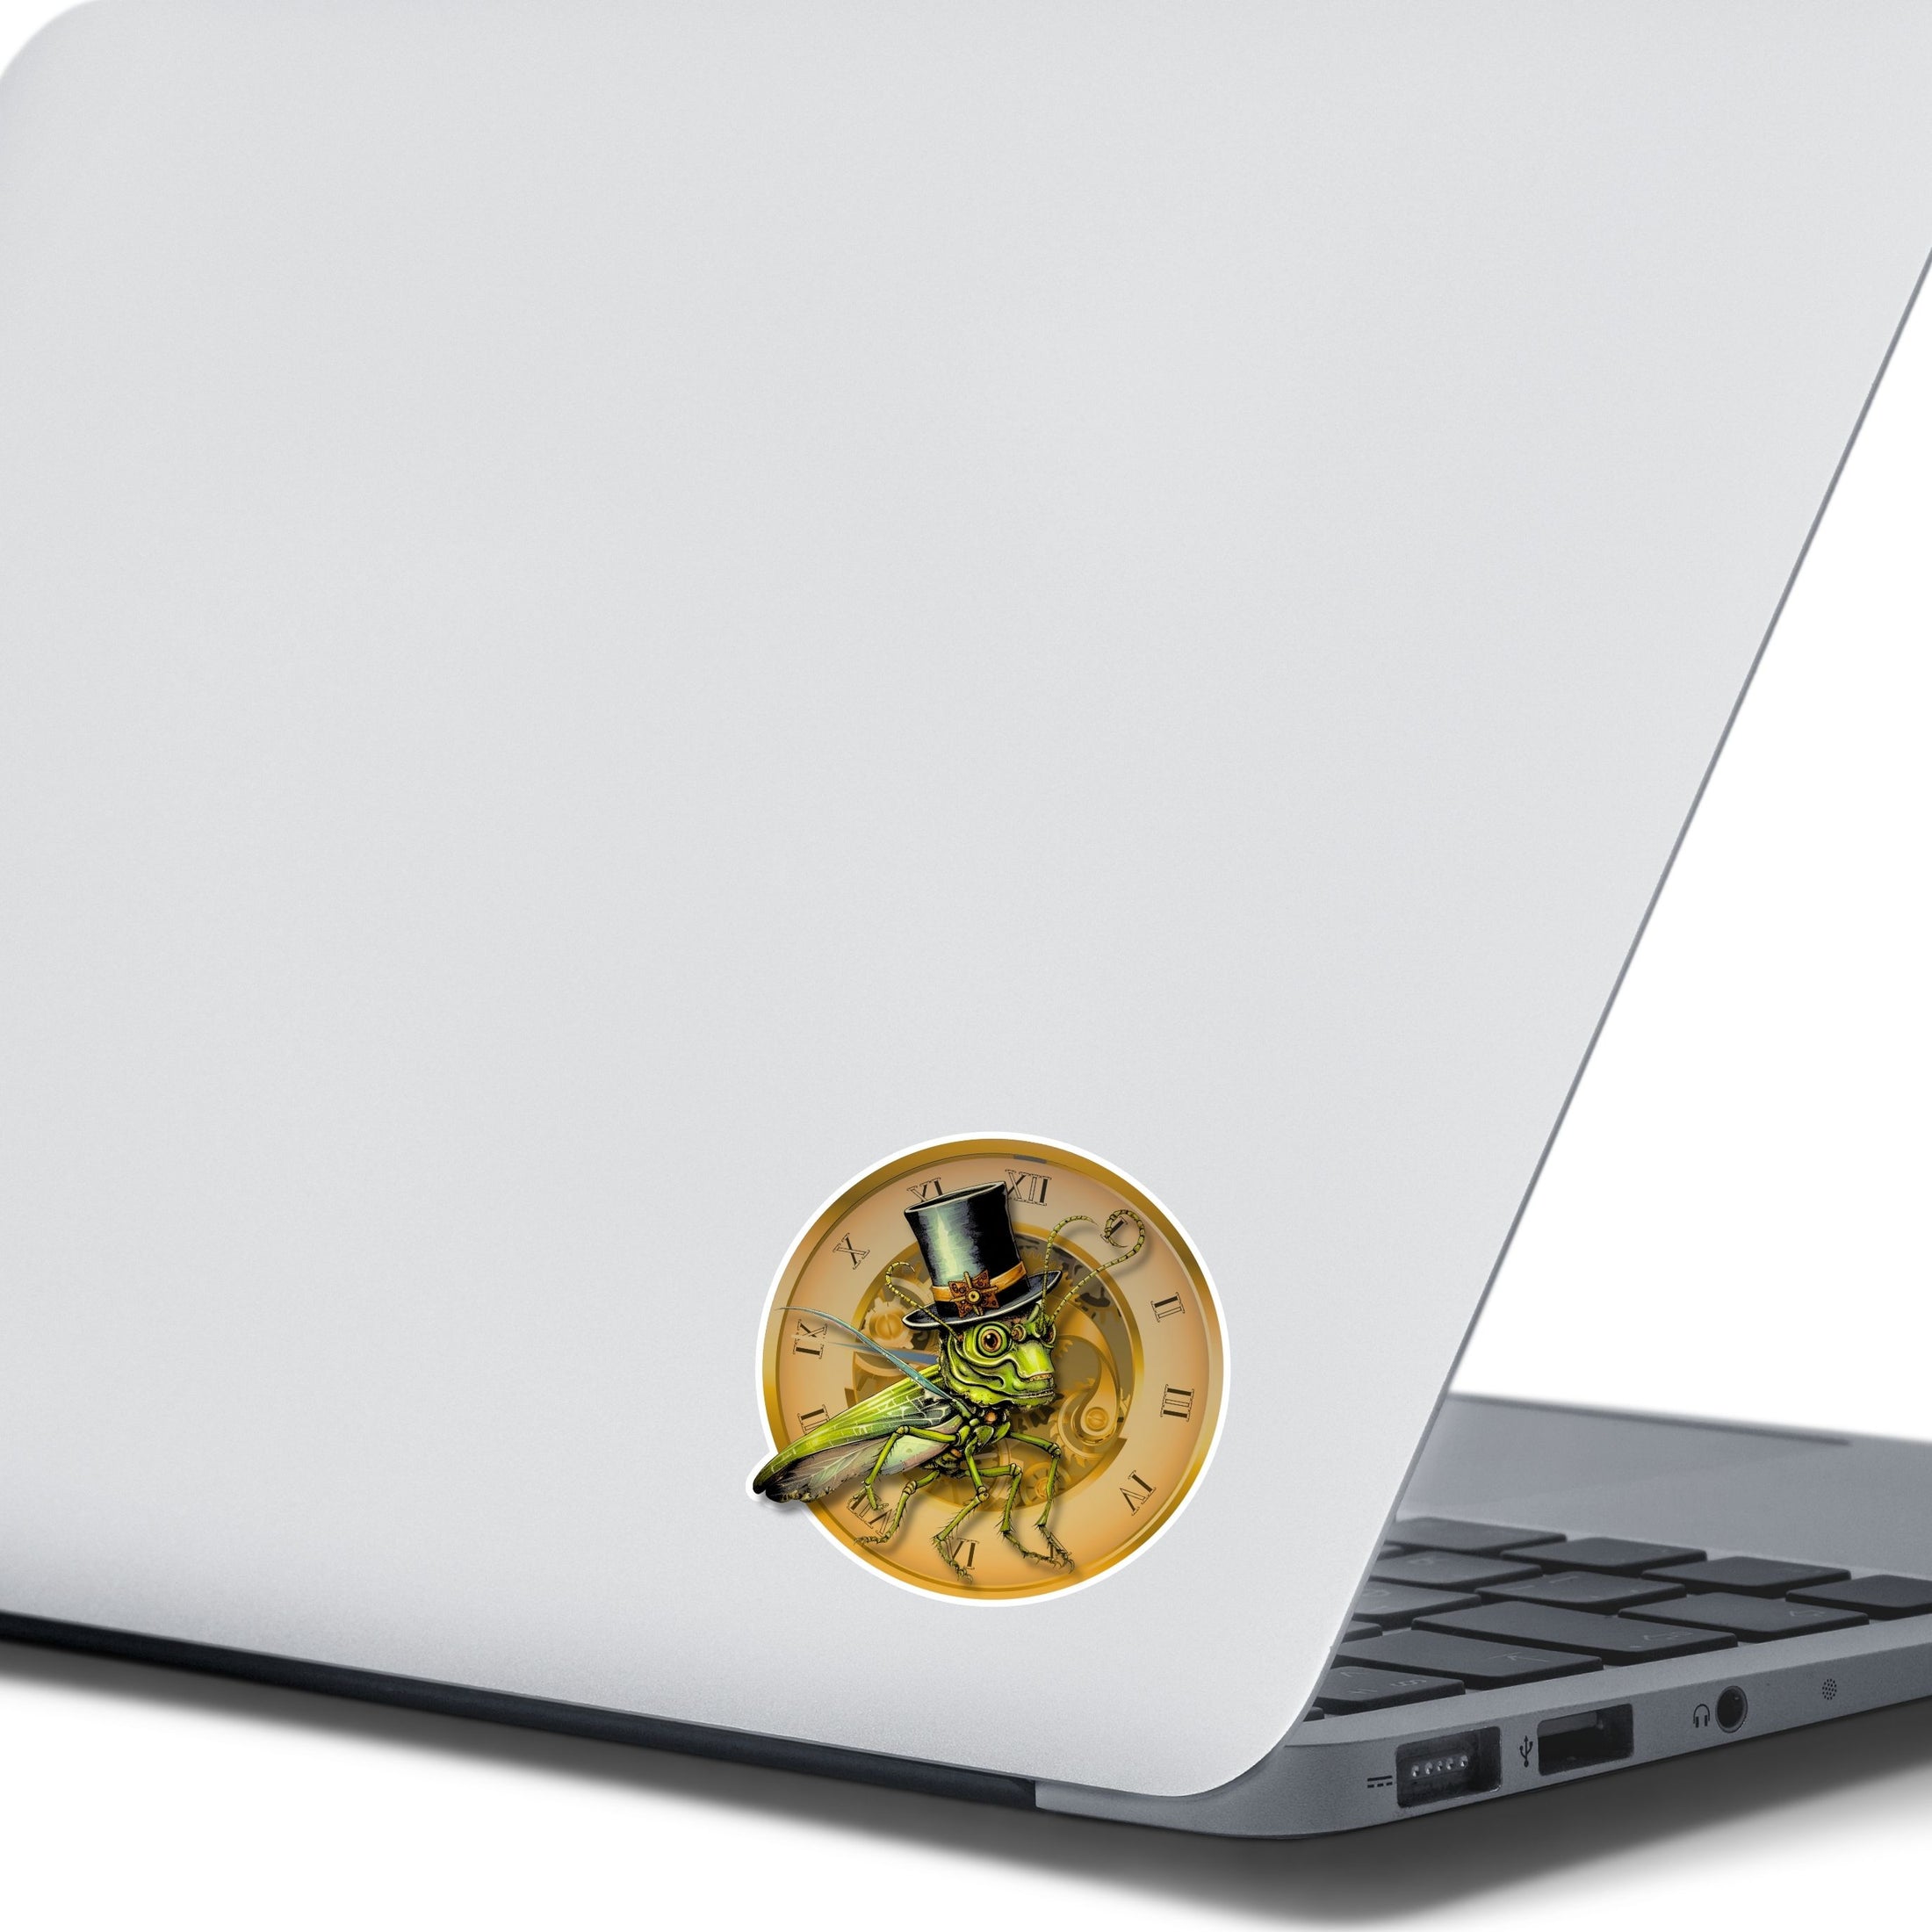 This image shows the steampunk grasshopper sticker on the back of an open laptop.